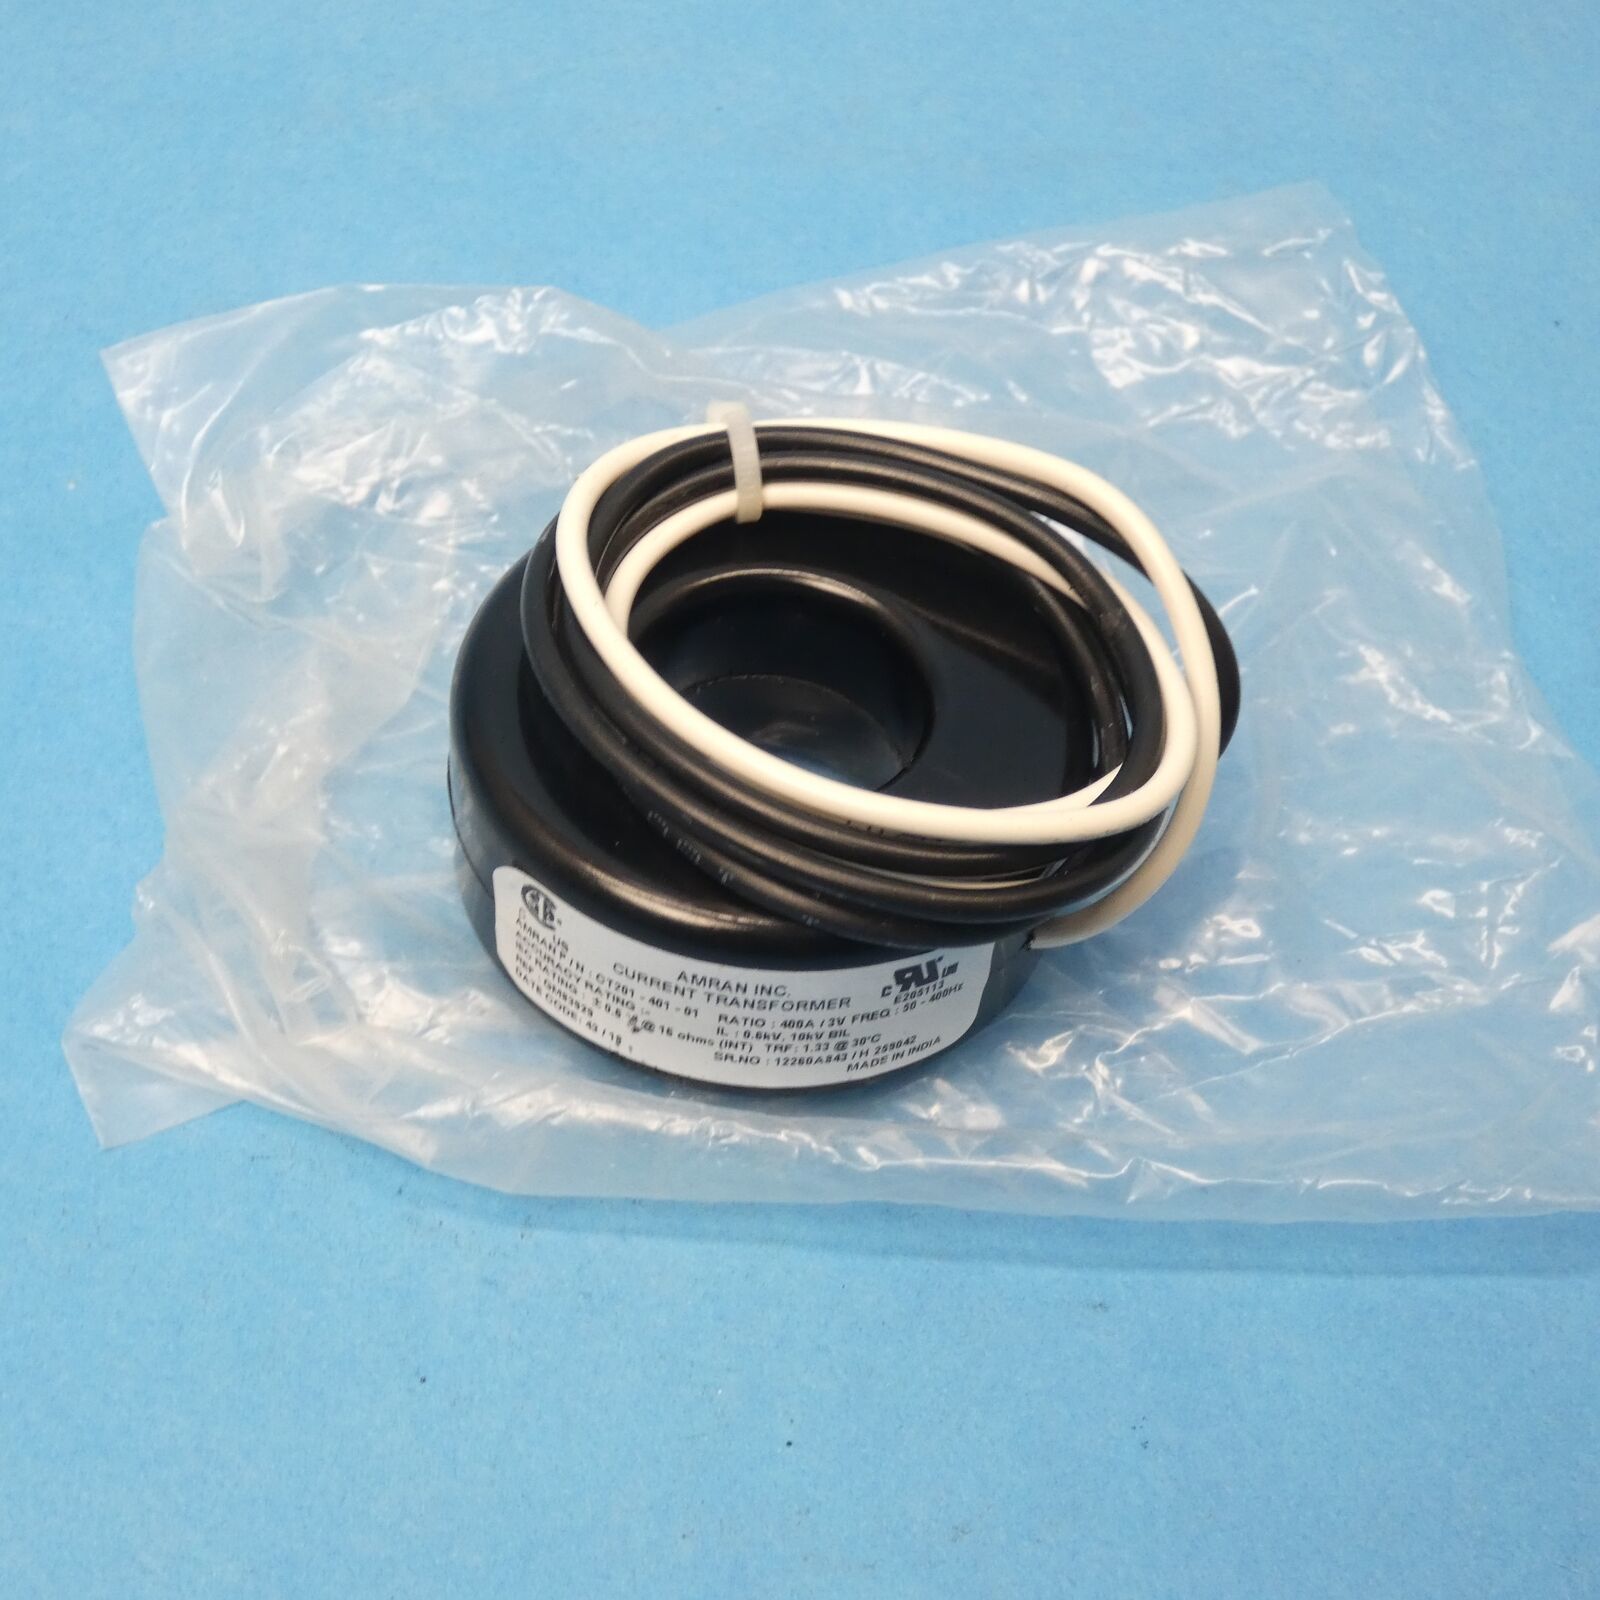 Primary image for Amran CT201-401-01 Current Transformer 1.13" Window 400A/3V Ratio 2.5" ID